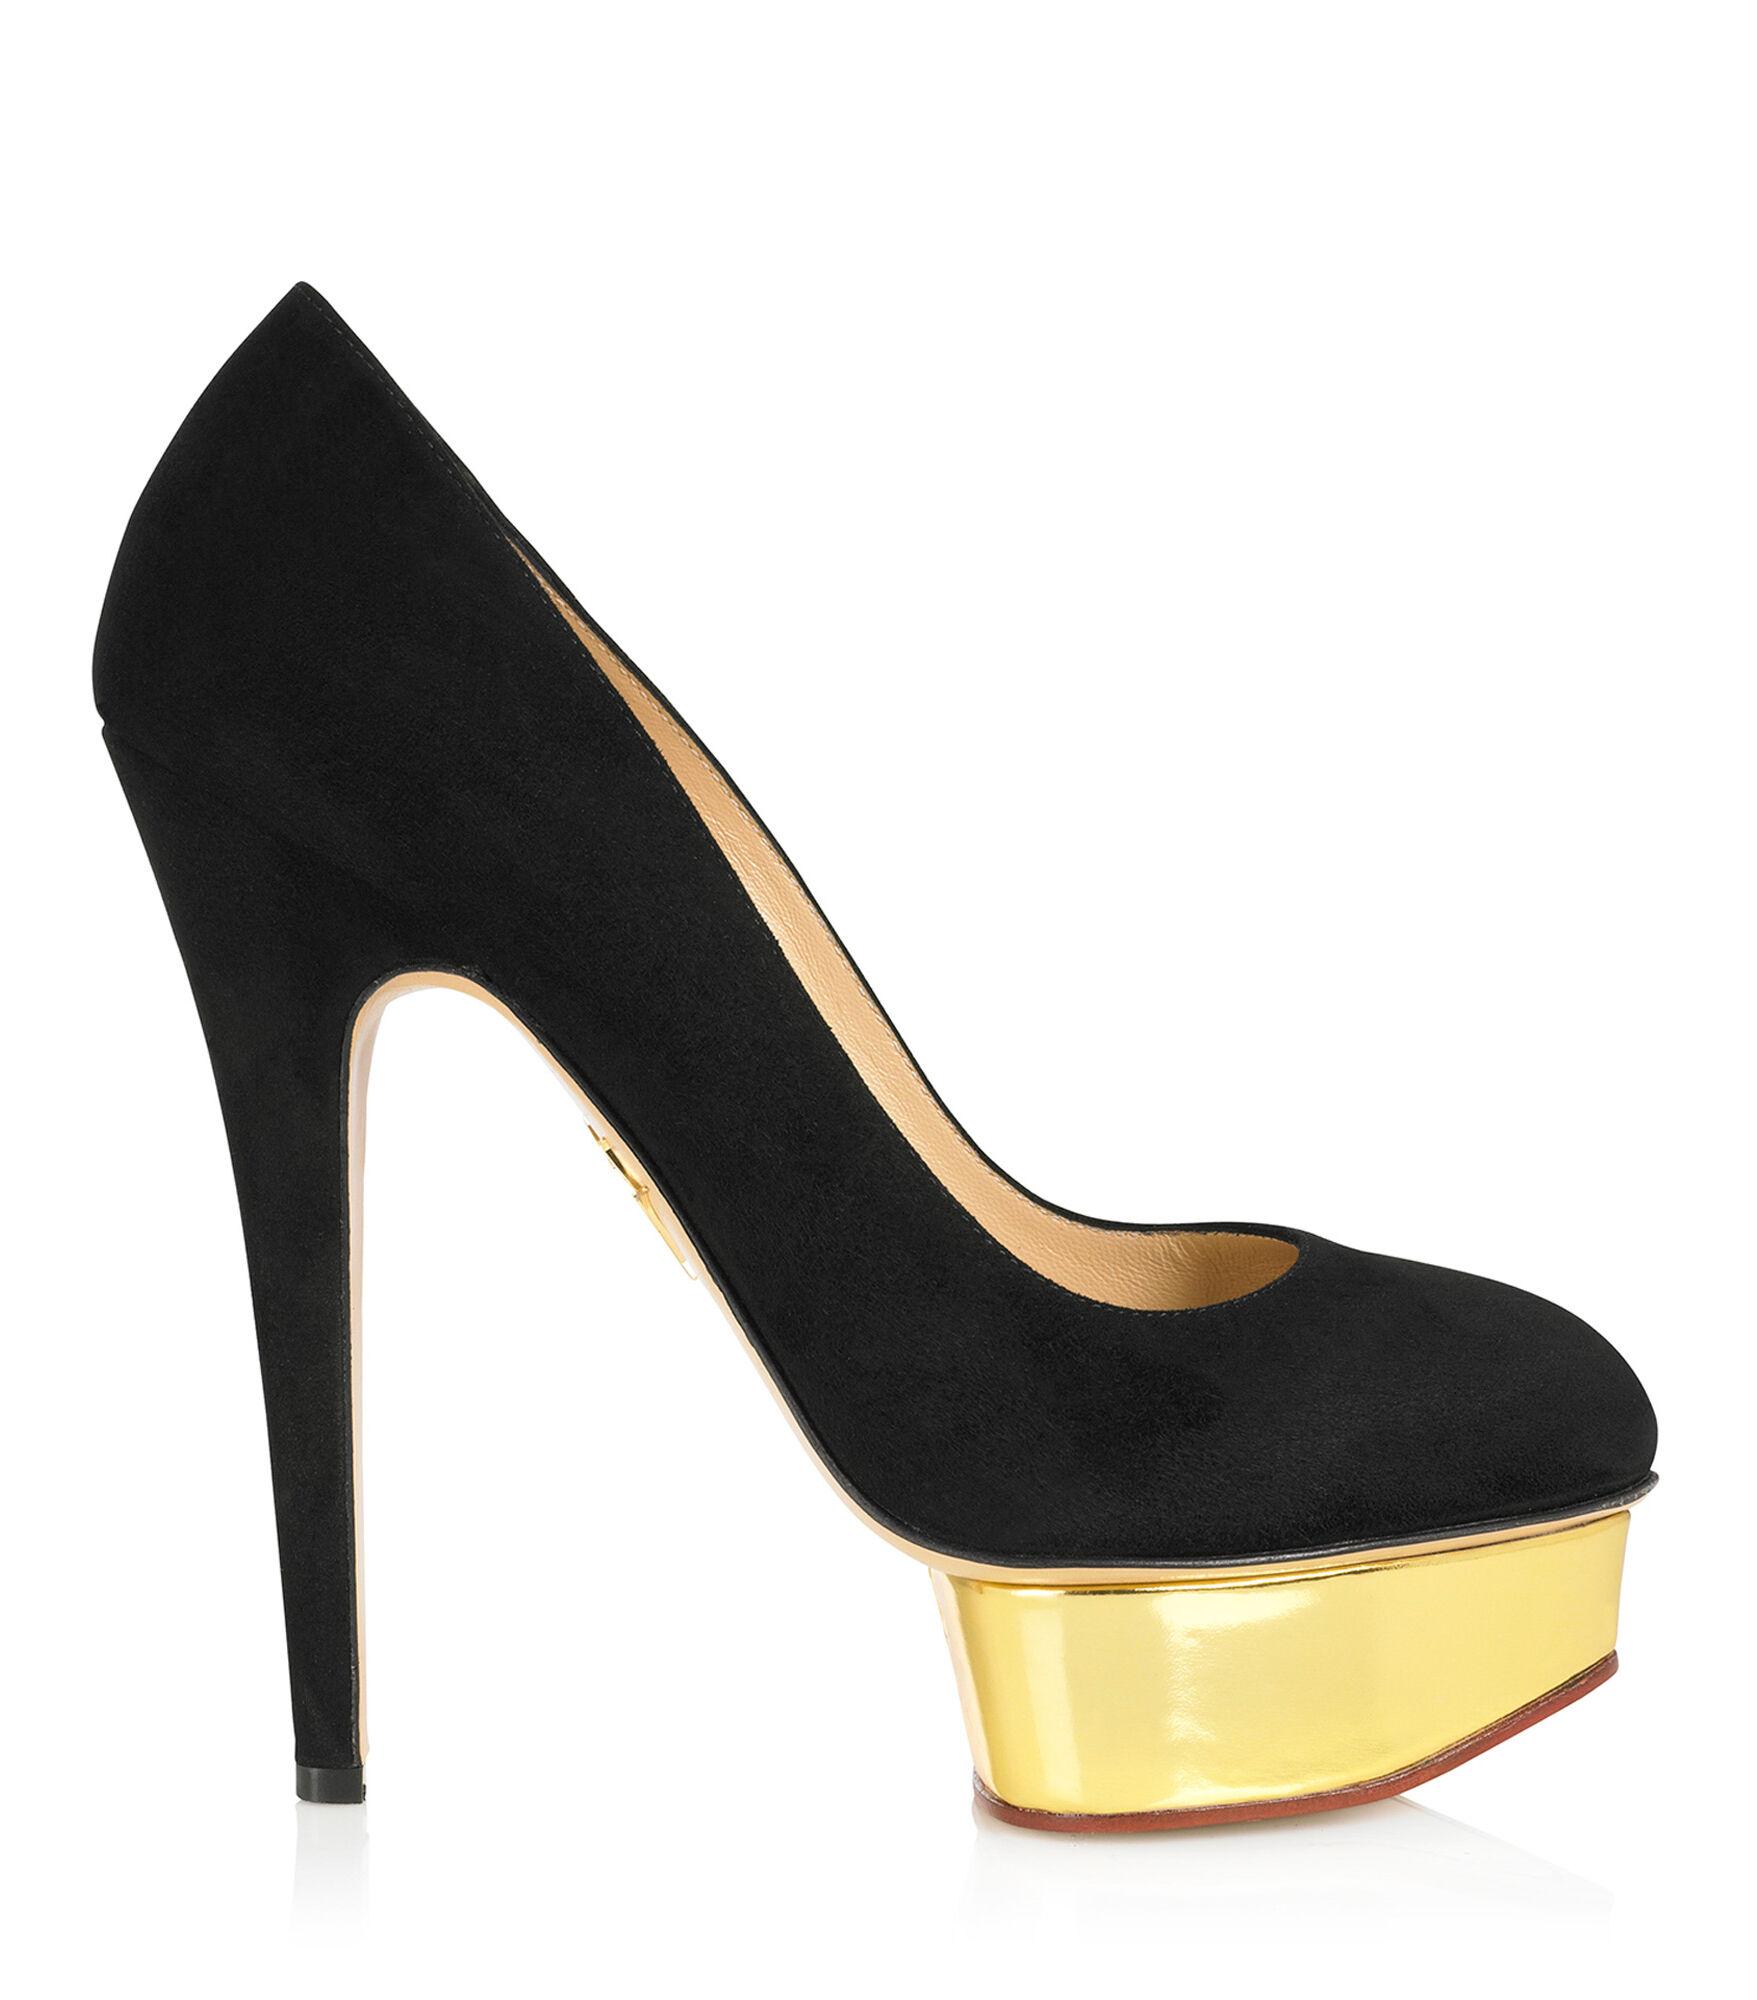 Charlotte Olympia Dolly Suede Platform Pumps in Black/Gold (Black ...